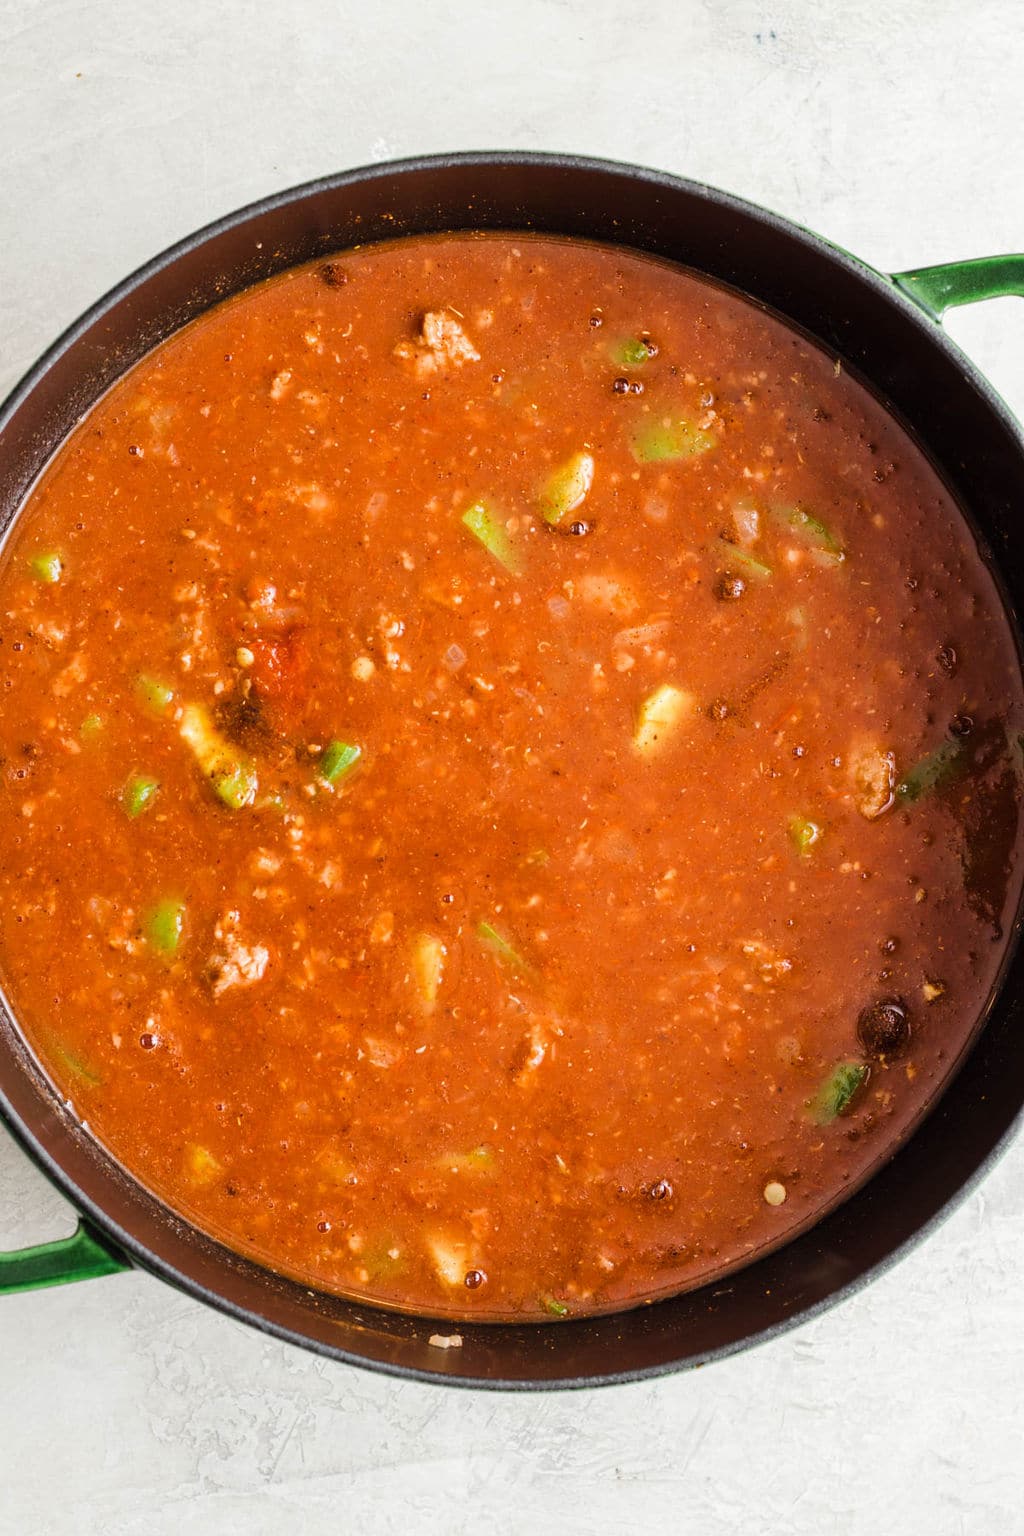 a large black pot filled with red tomato sauce and vegetables.